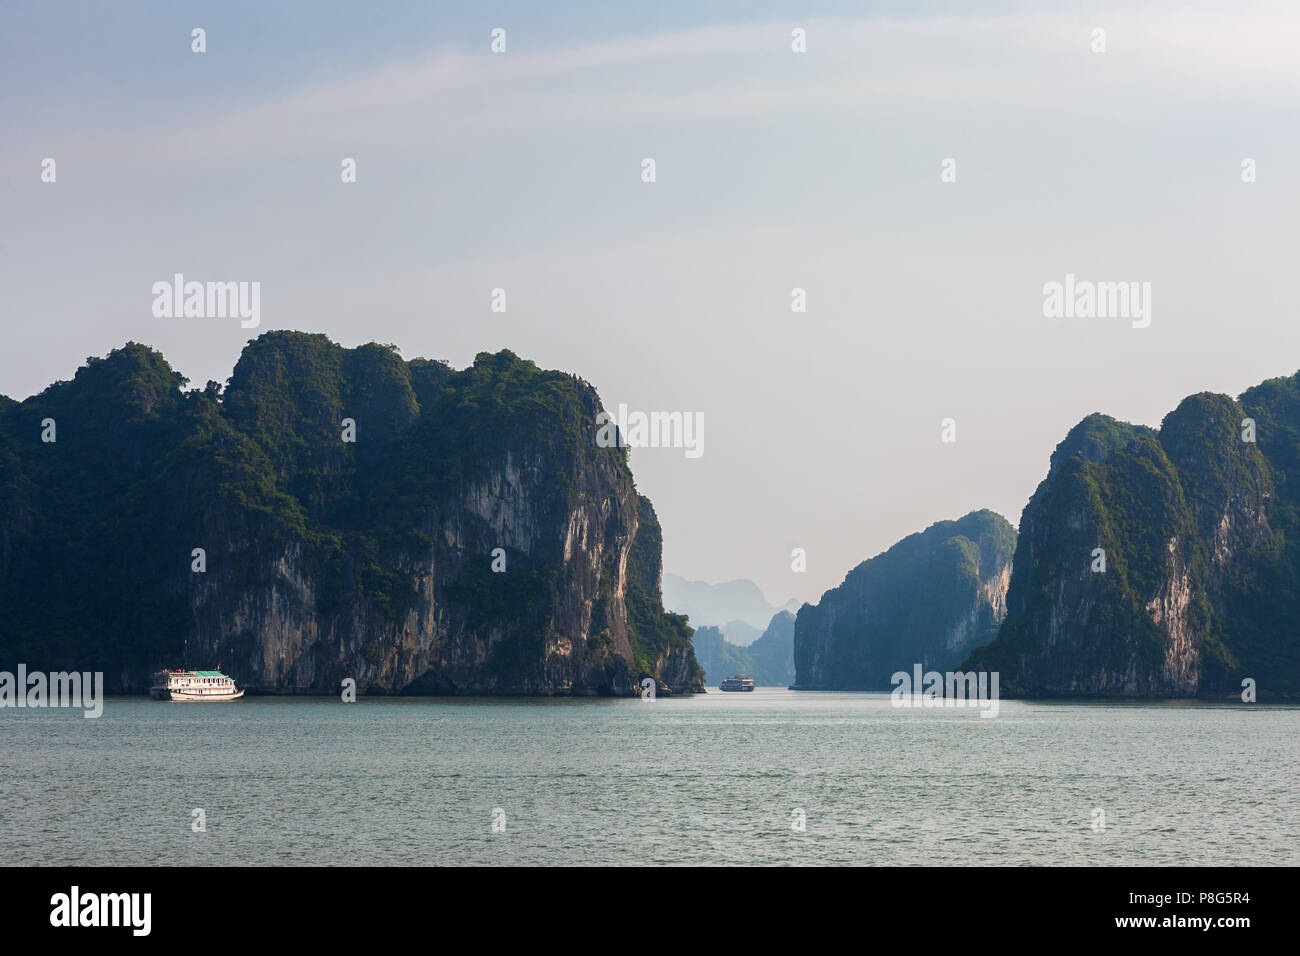 The narow channel between Đảo Đầu Gỗ and hòn Hang Sò, two of the many hundreds of islands in Ha Long Bay, Quảng Ninh Province, Viet Nam Stock Photo